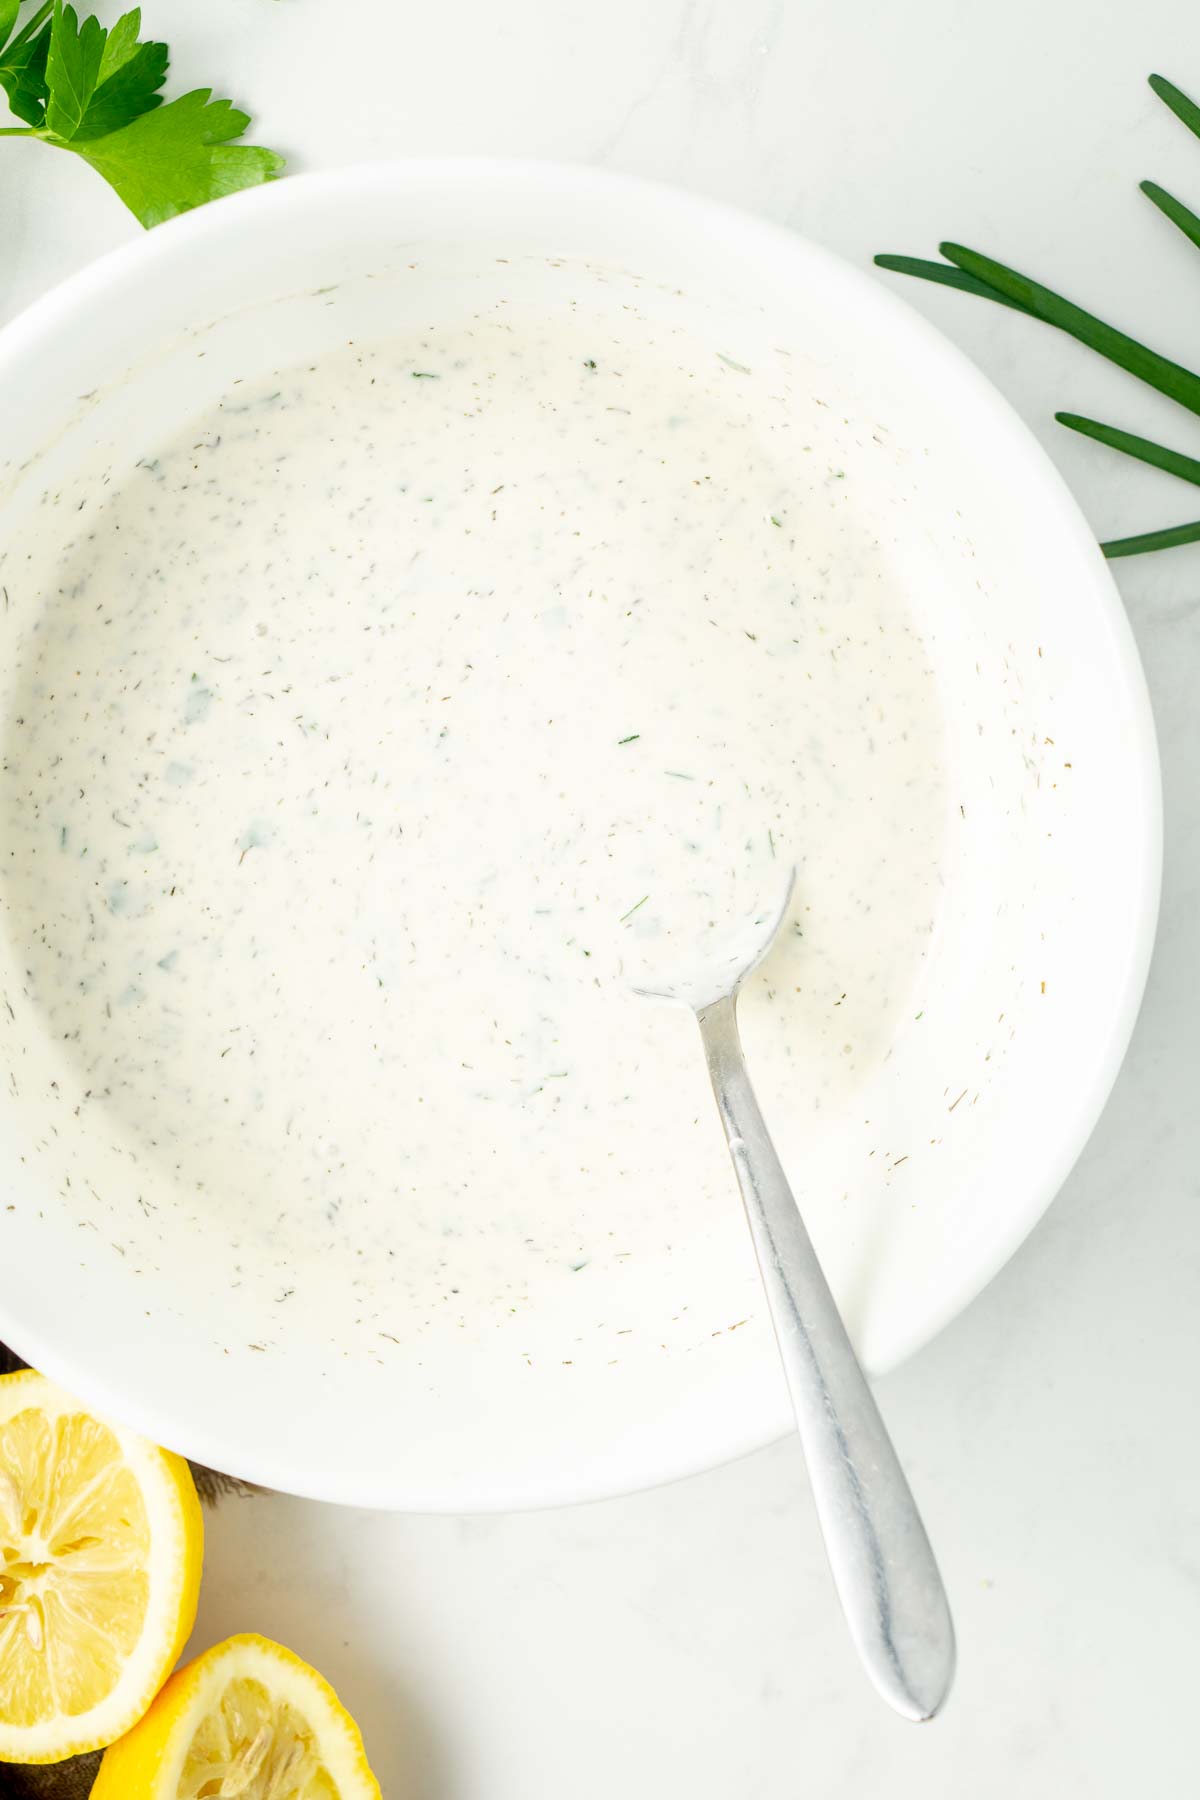 Dairy free ranch dressing in a bowl ready to serve.